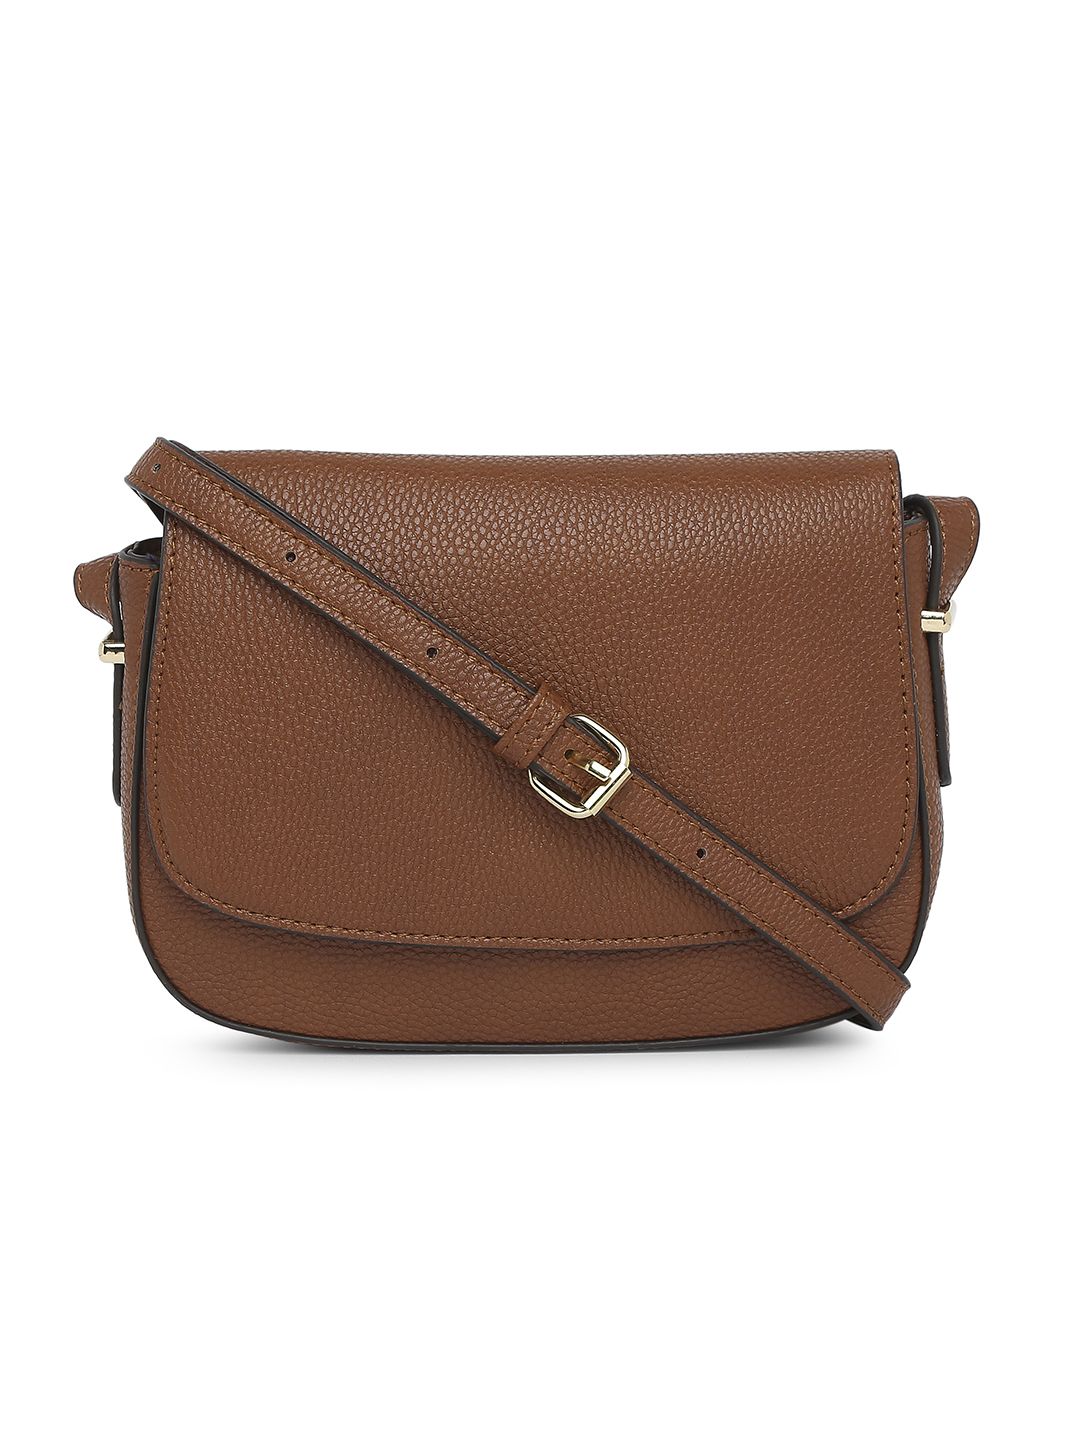 Accessorize Brown Structured Ruby Saddle Sling Bag Price in India